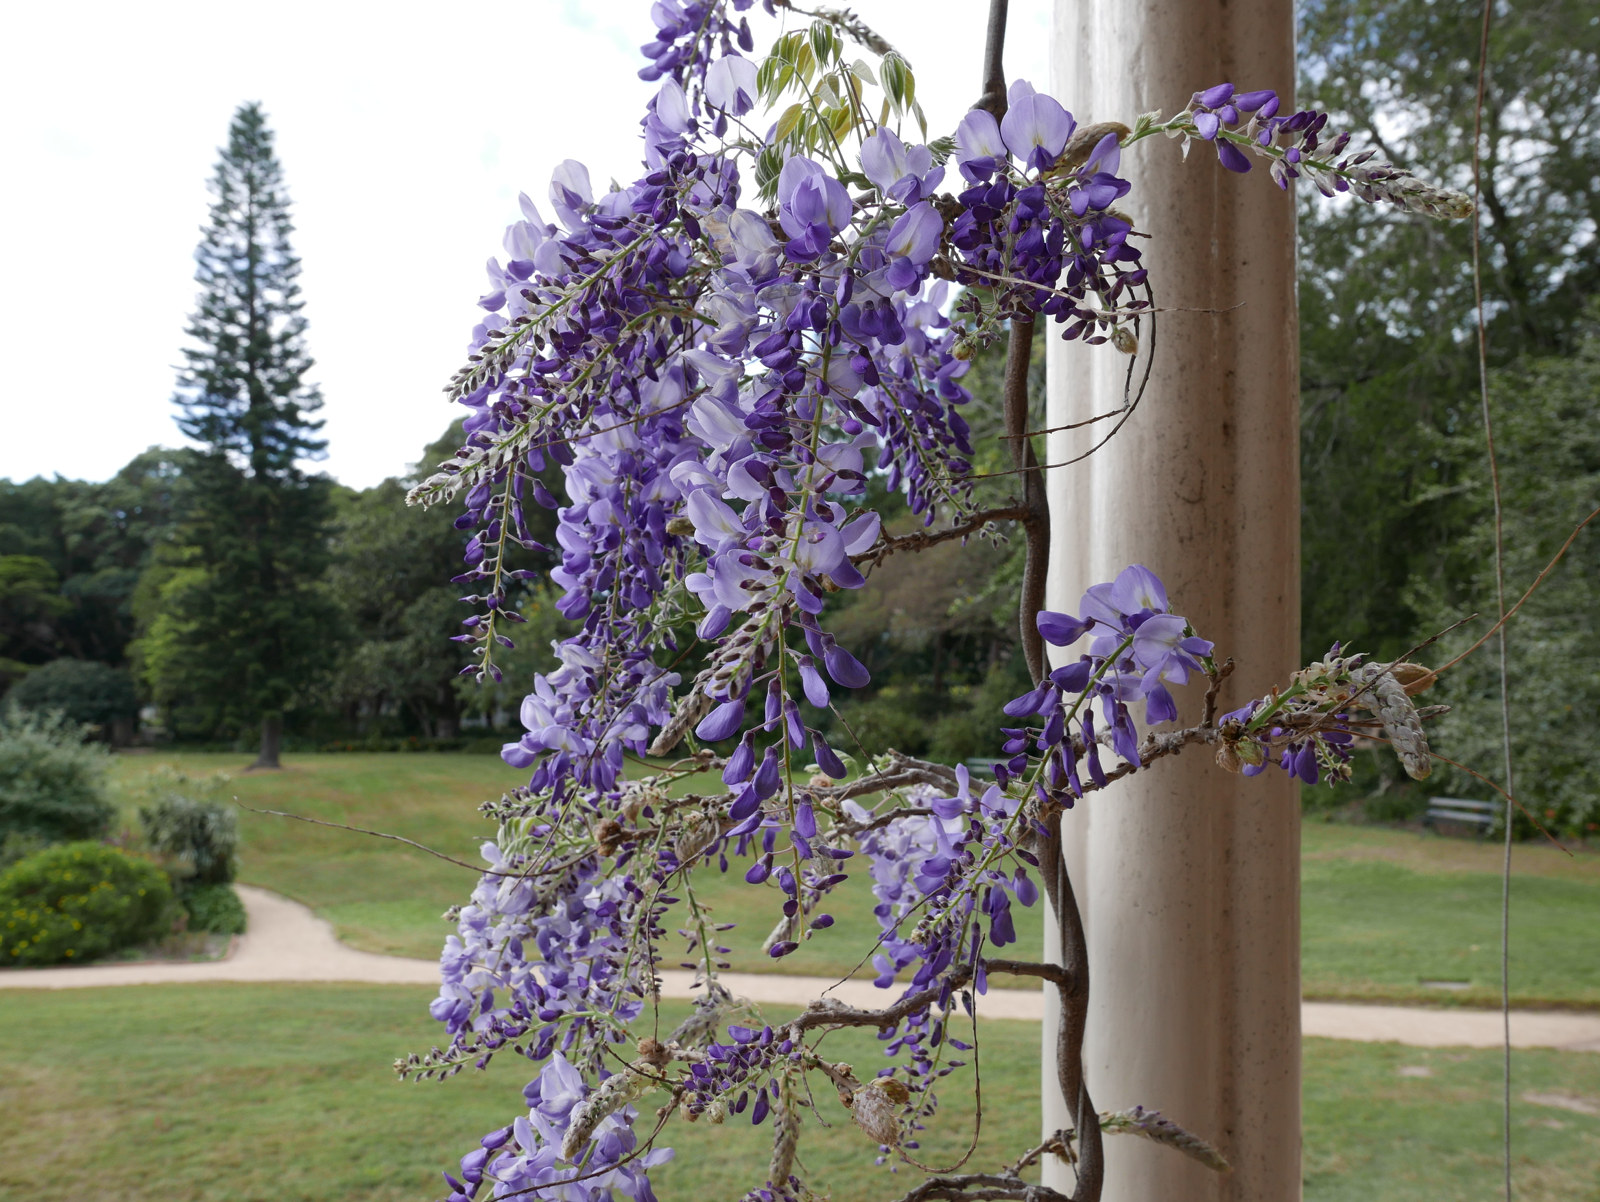 The Wisteria starting to bloom on the veranda of Vaucluse House